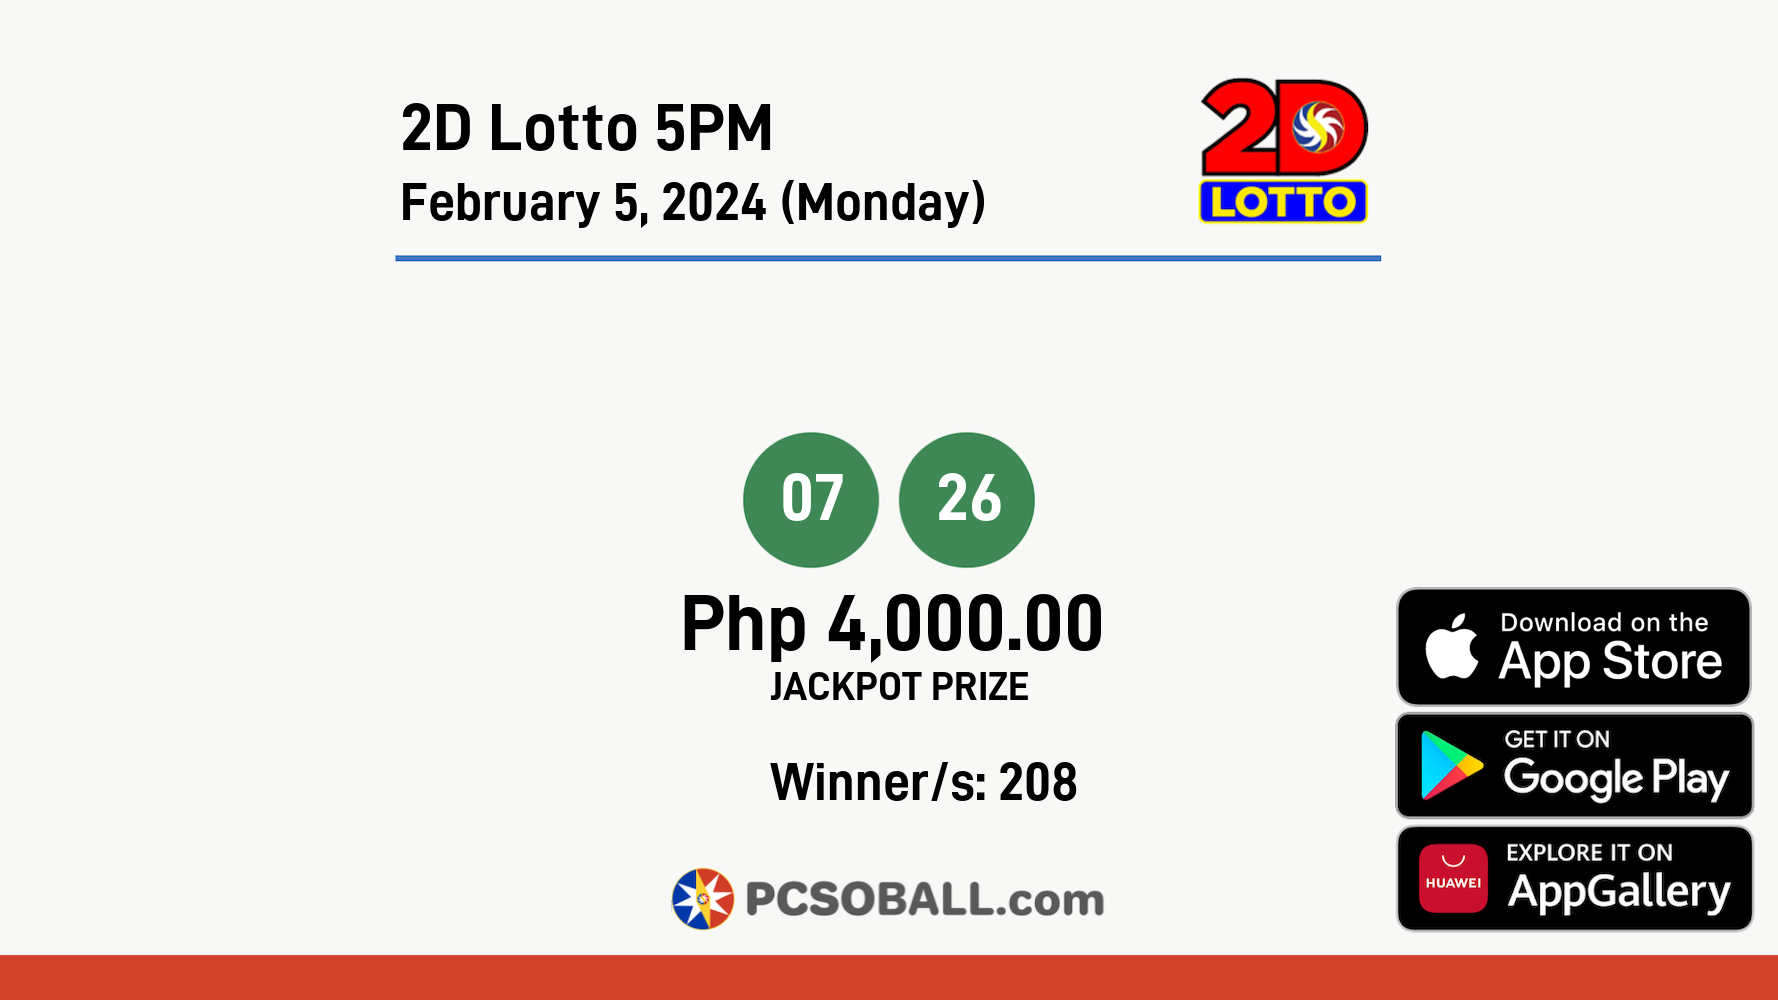 2D Lotto 5PM February 5, 2024 (Monday) Result